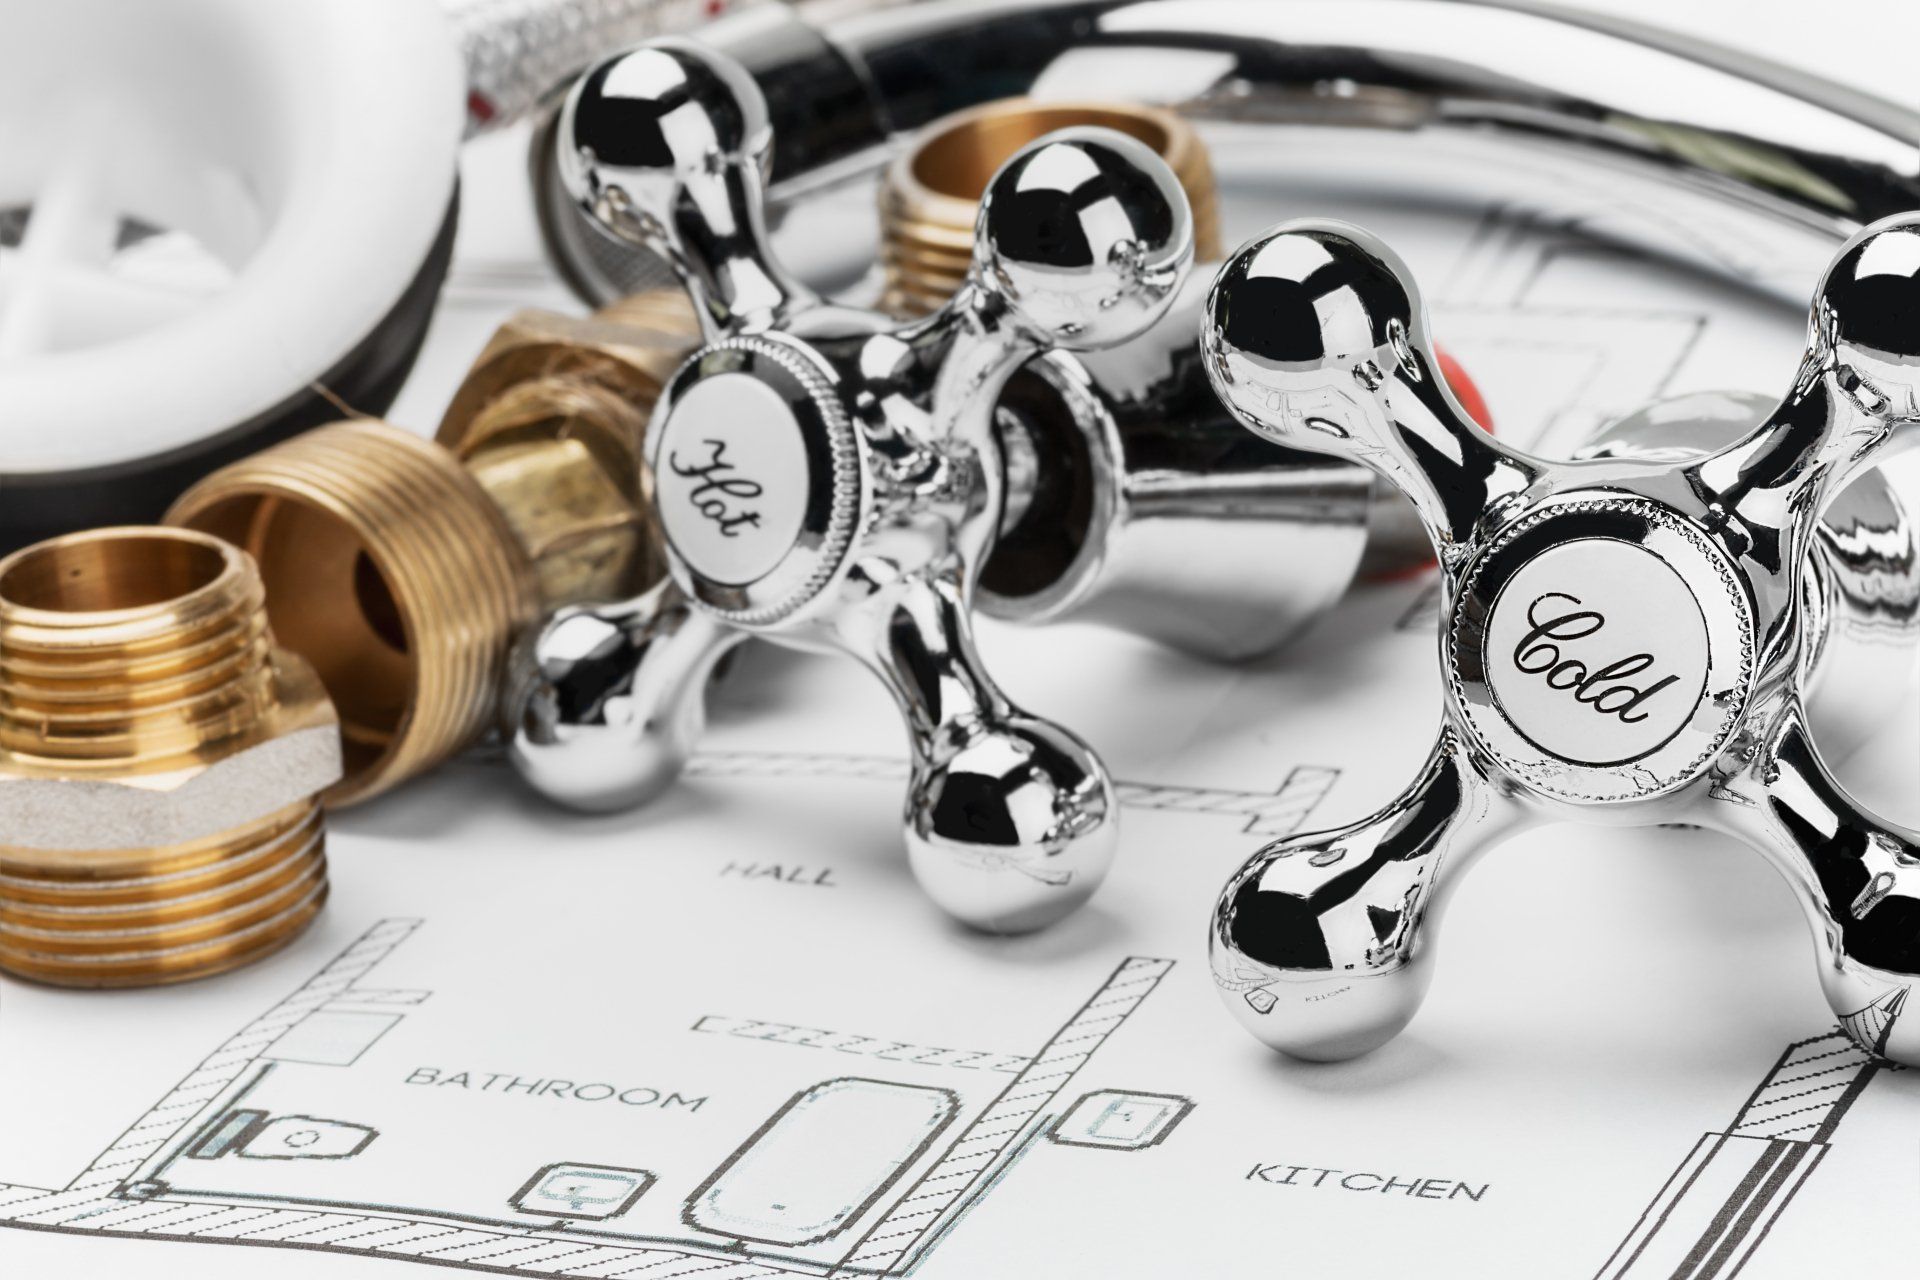 Plumbing And Tools Lying On Drawing For Repair - Manitowoc, WI - Manitowoc Plumbing Service Inc.